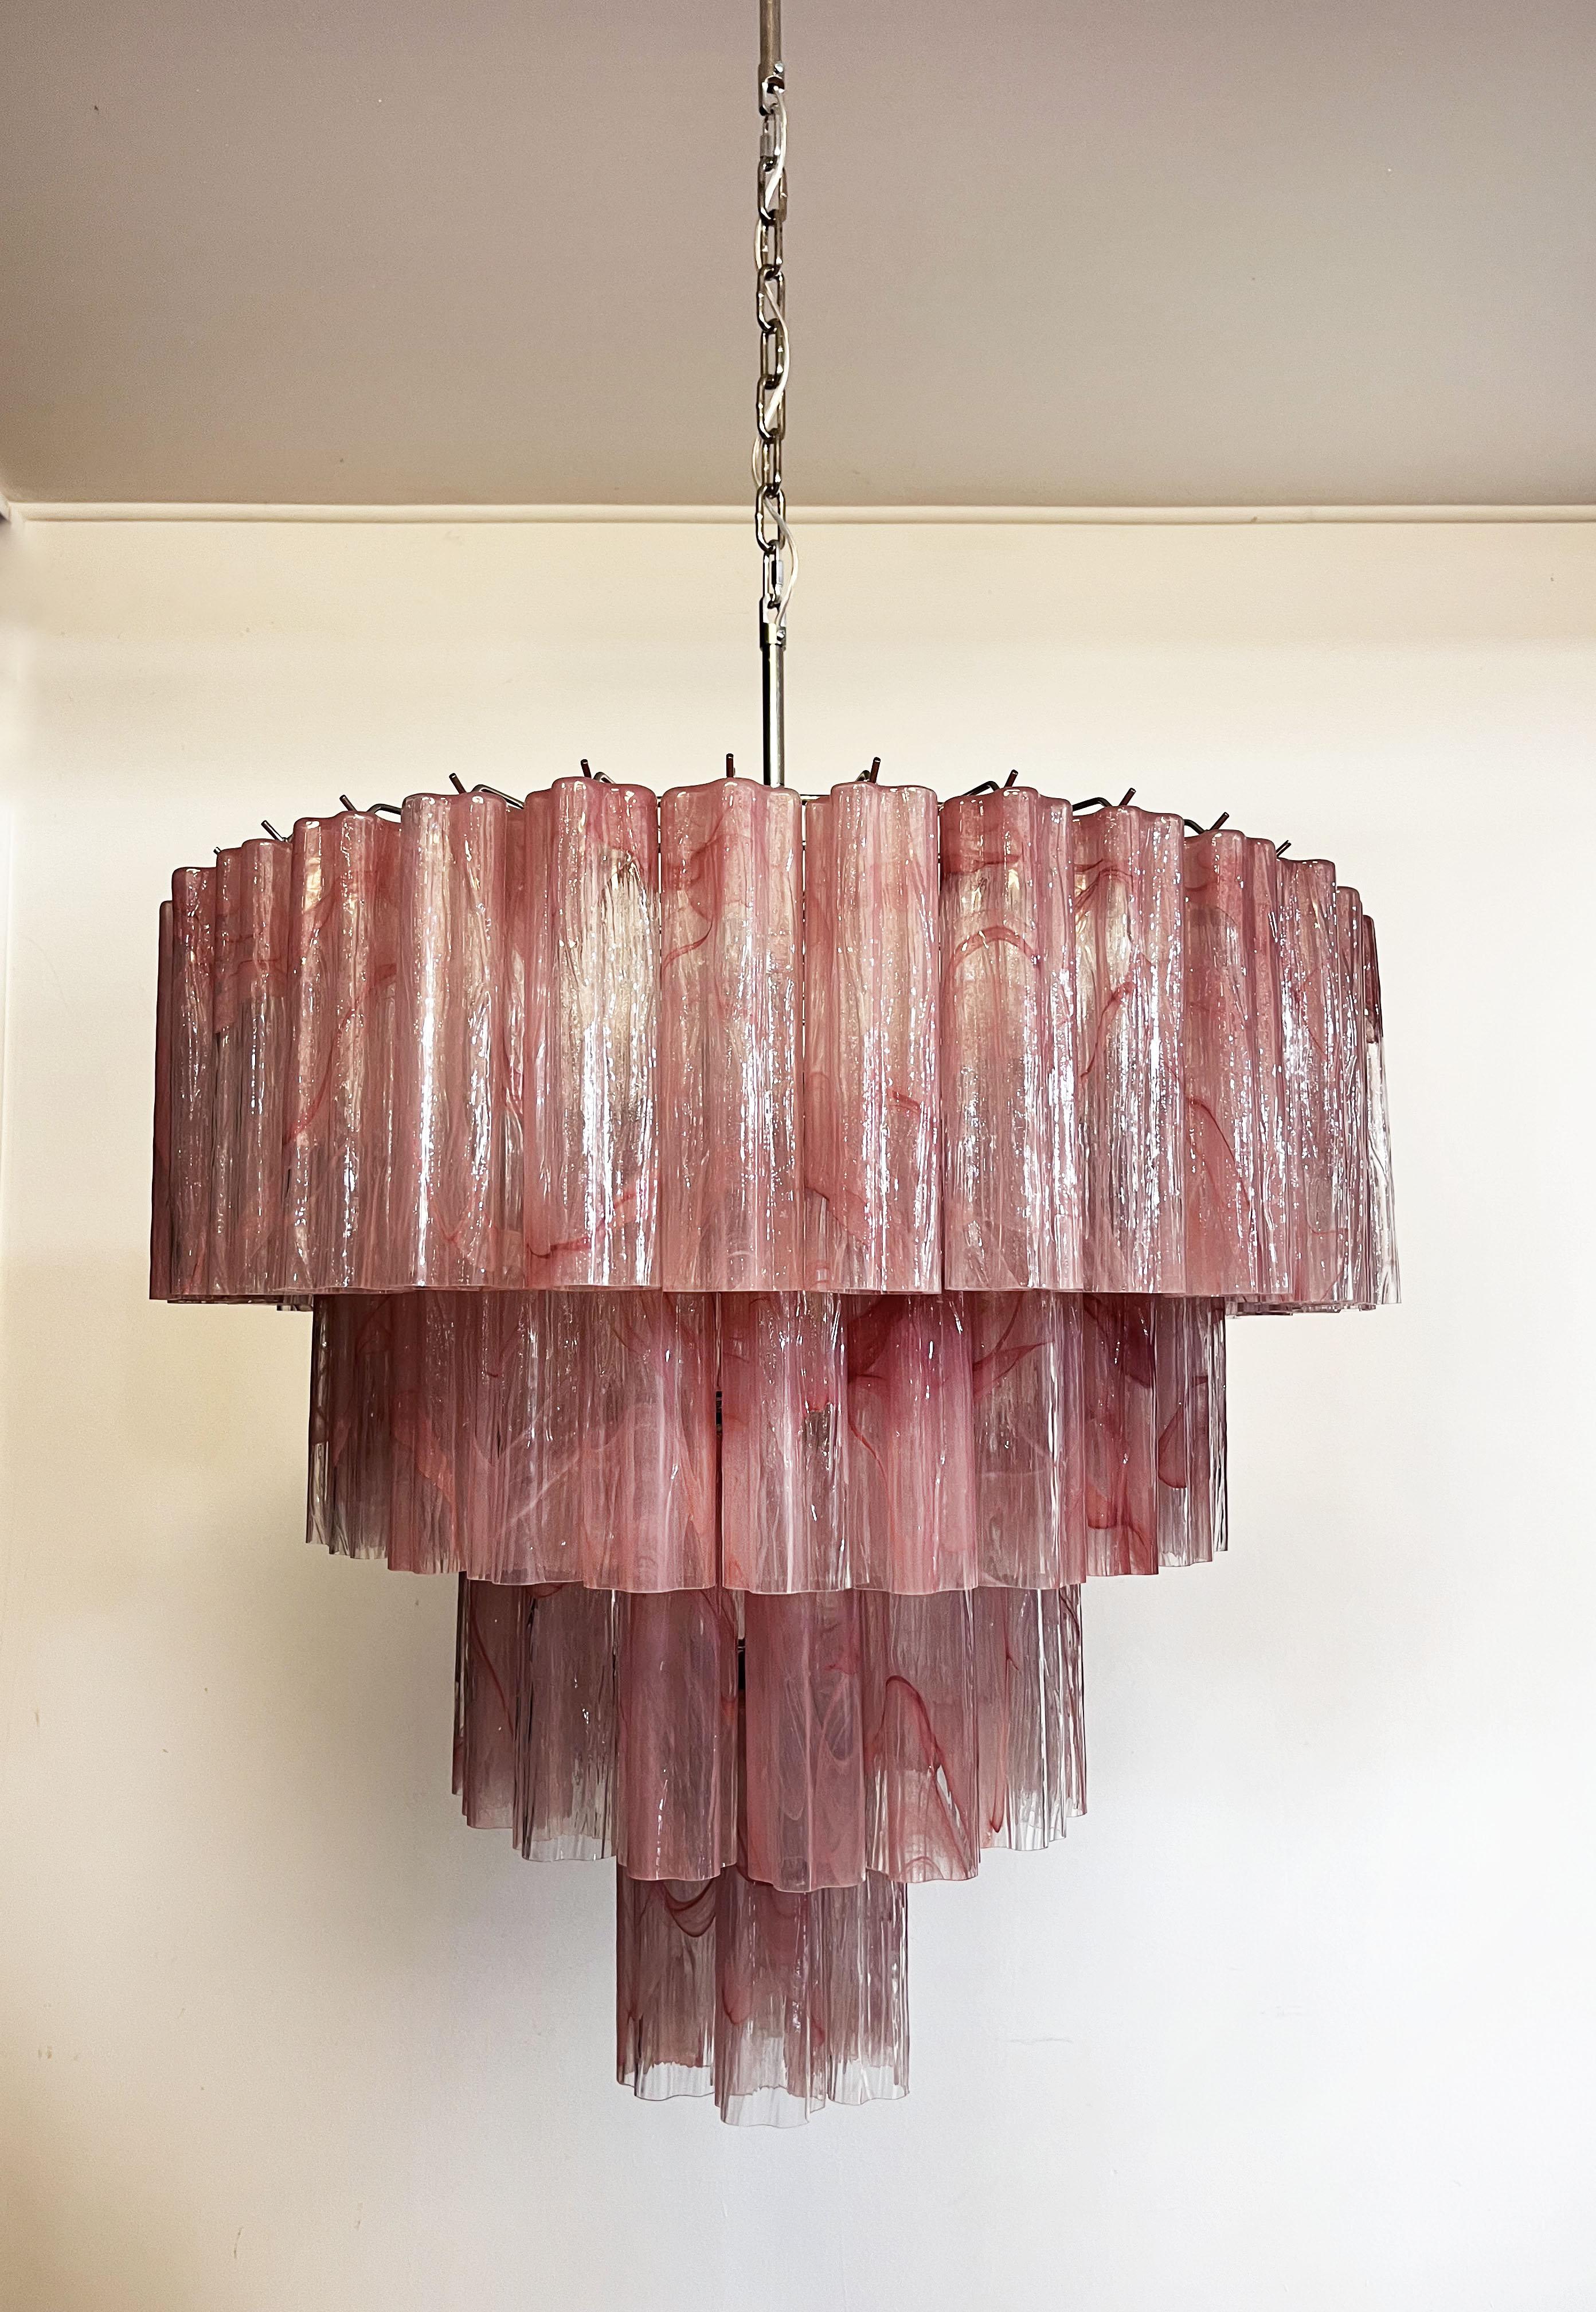 Italian vintage chandelier in Murano glass and nickel plated metal structure on 4 levels. The armor polished nickel supports 78 large albaster pink glass tubes in a star shape. 
Period: Late 20th century
Dimensions: 63 inches (160 cm) height with